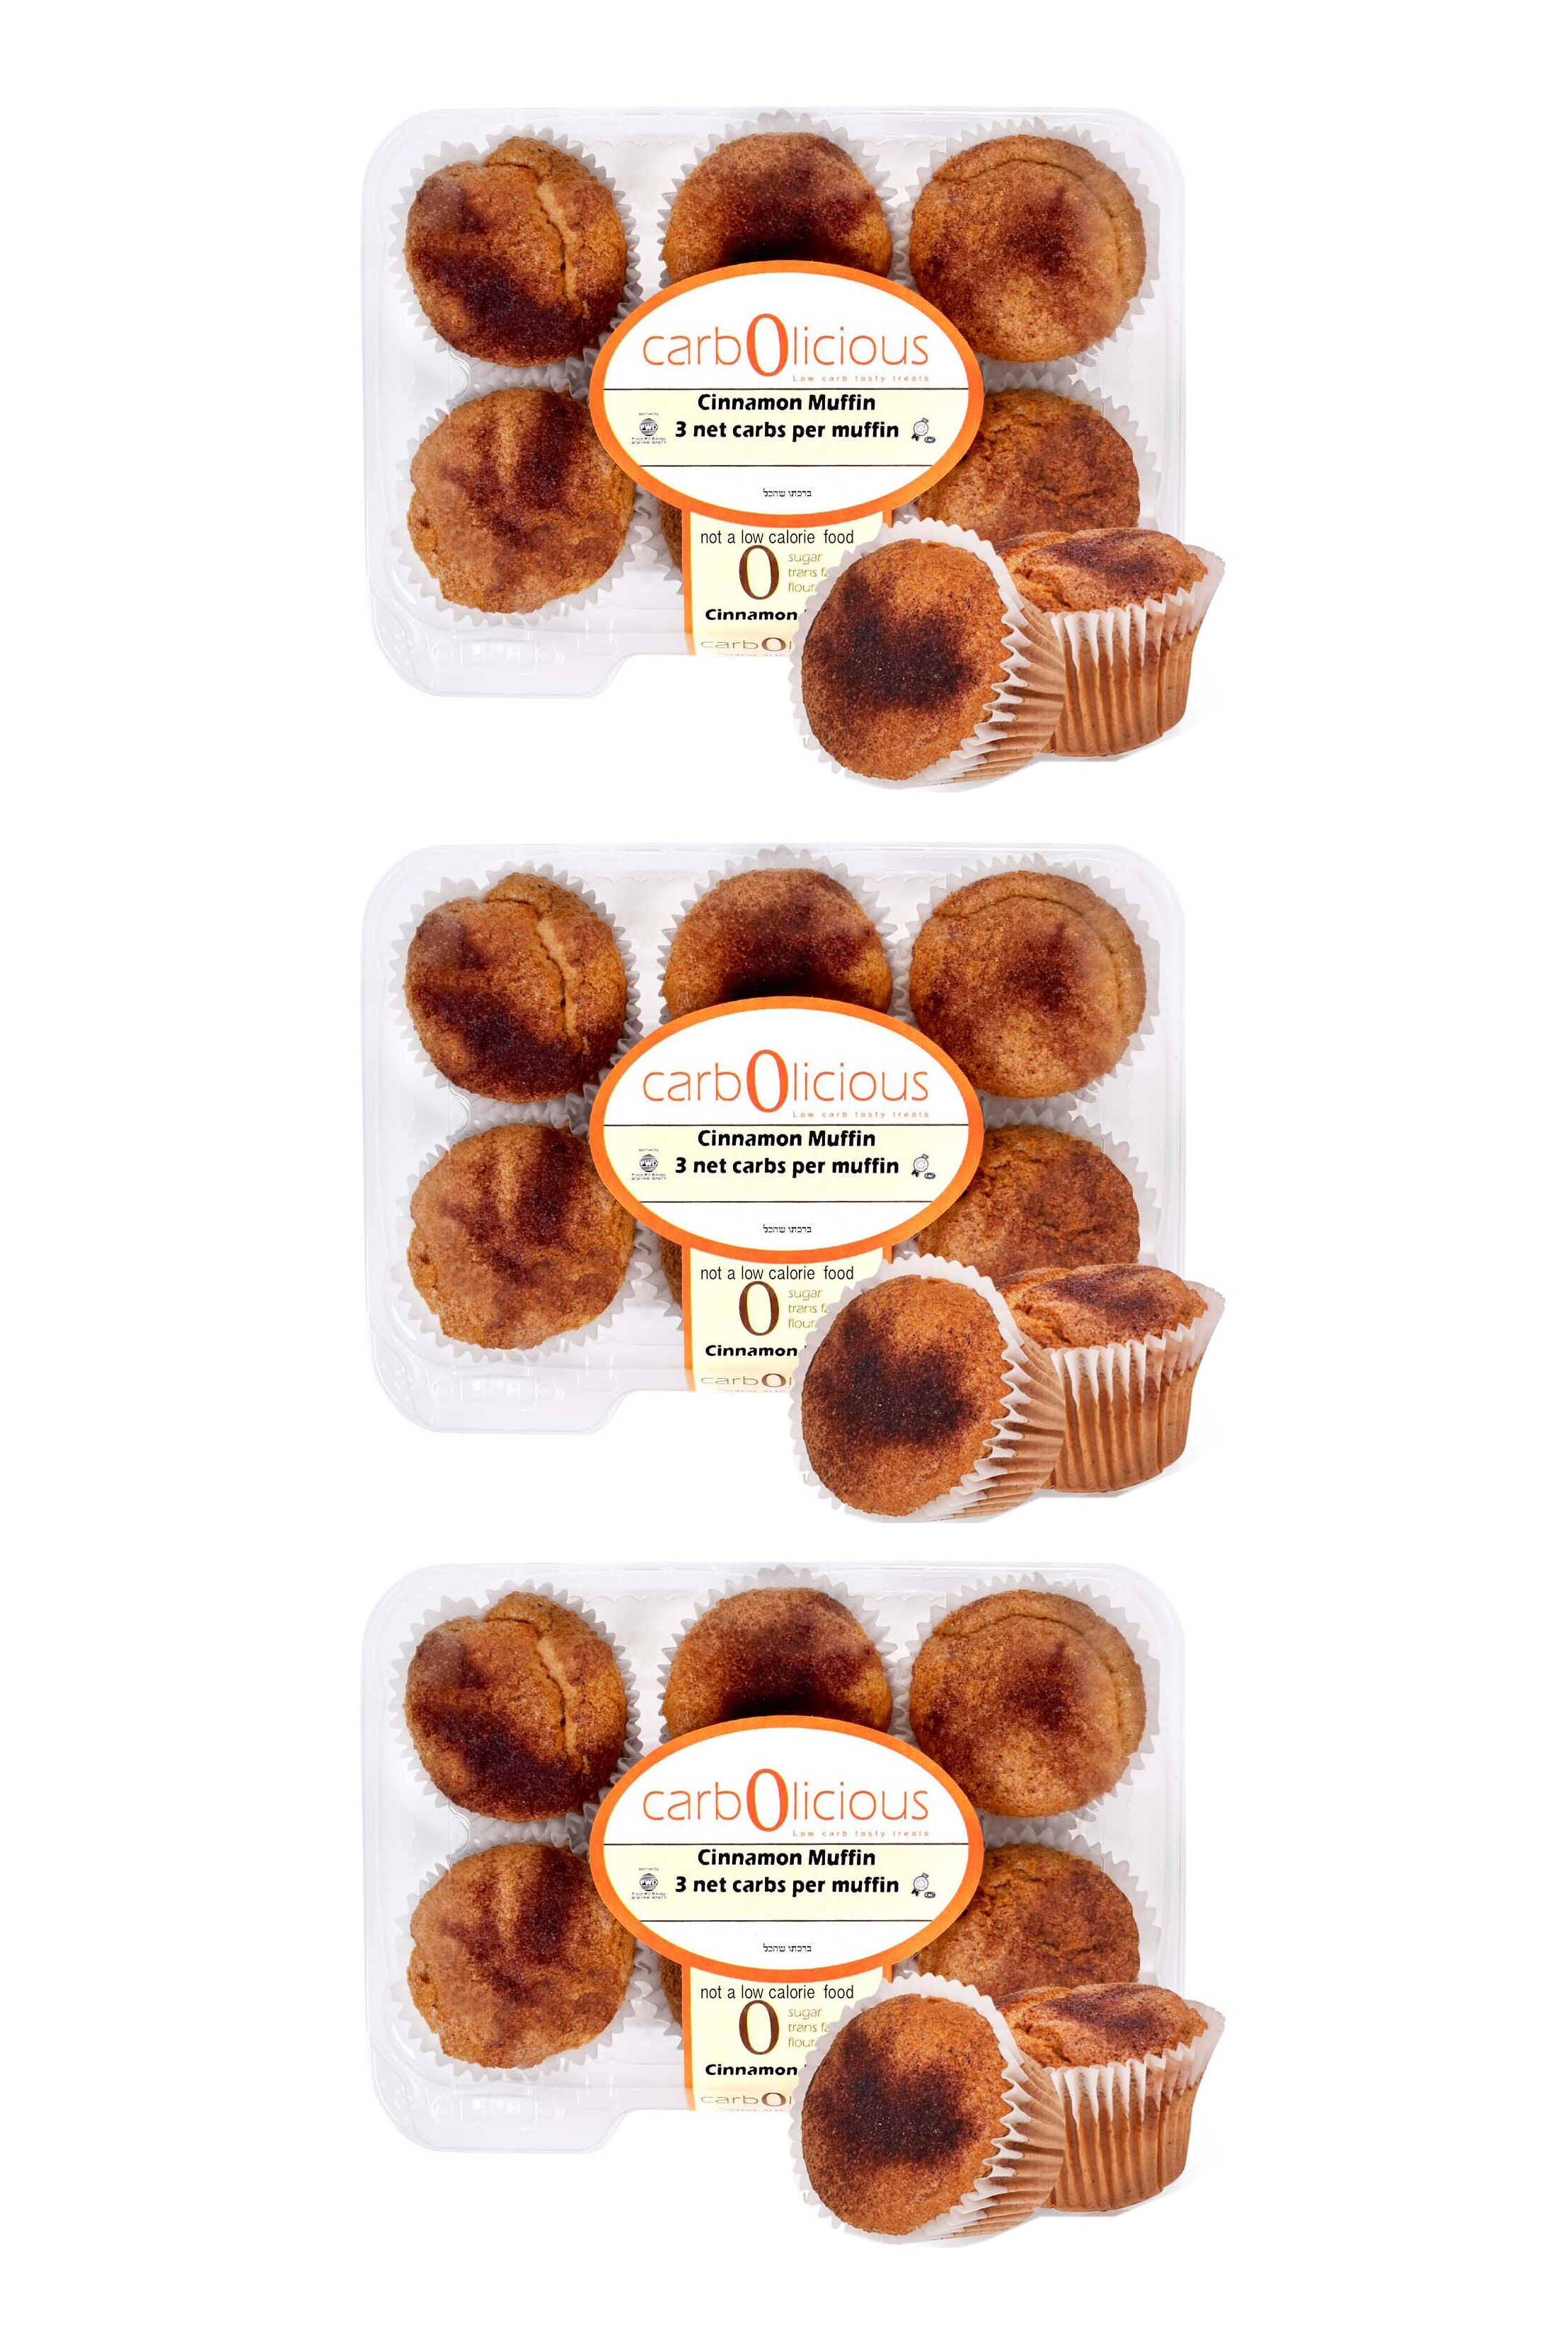 #Flavor_Cinnamon #Size_3-Pack (18 Muffins)